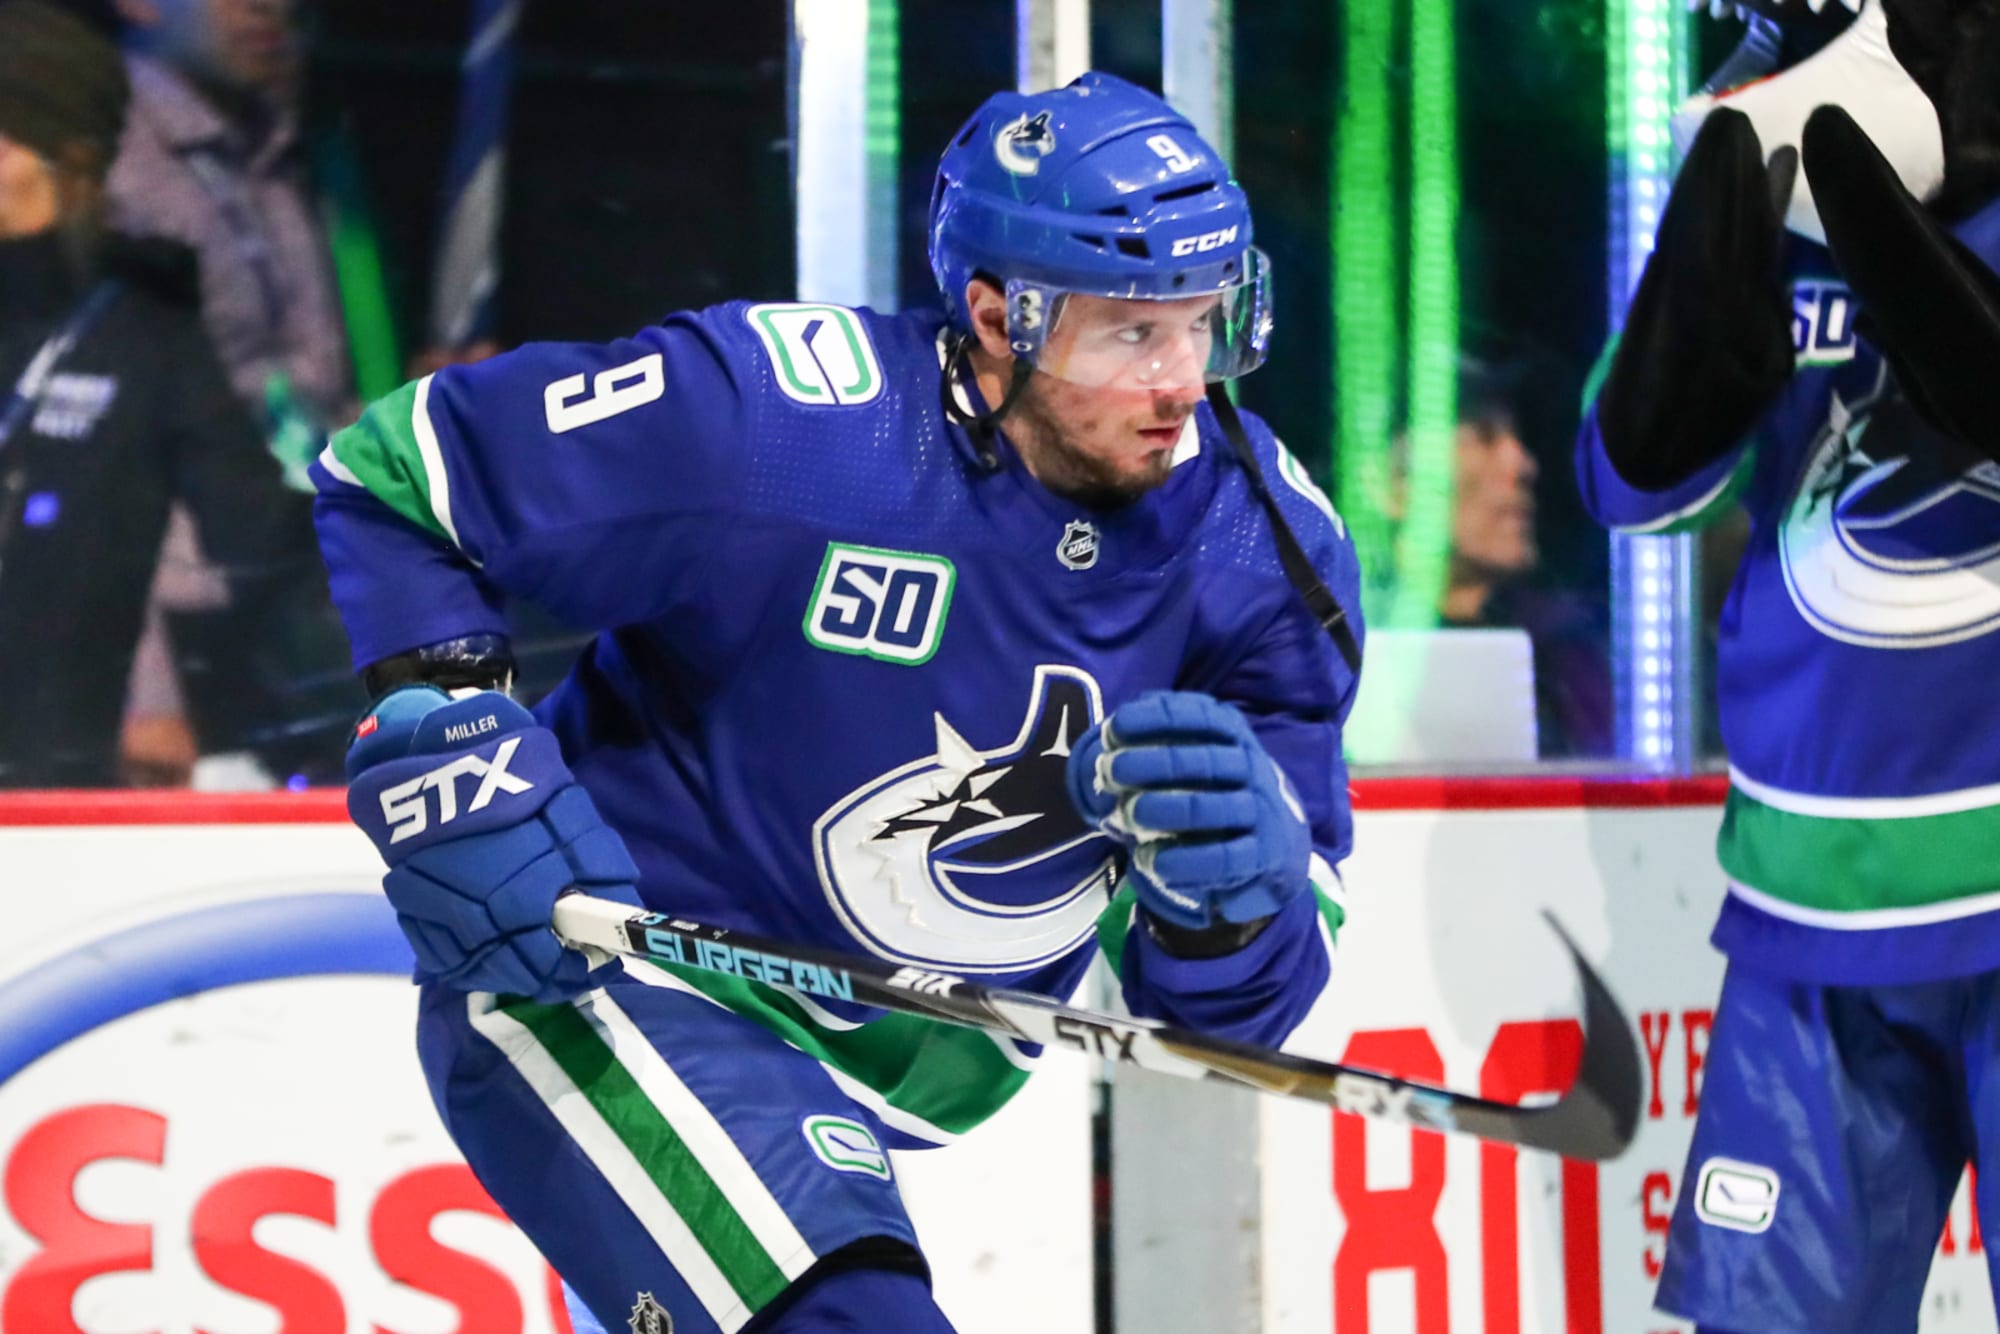 What's next for J.T. Miller and the Canucks?